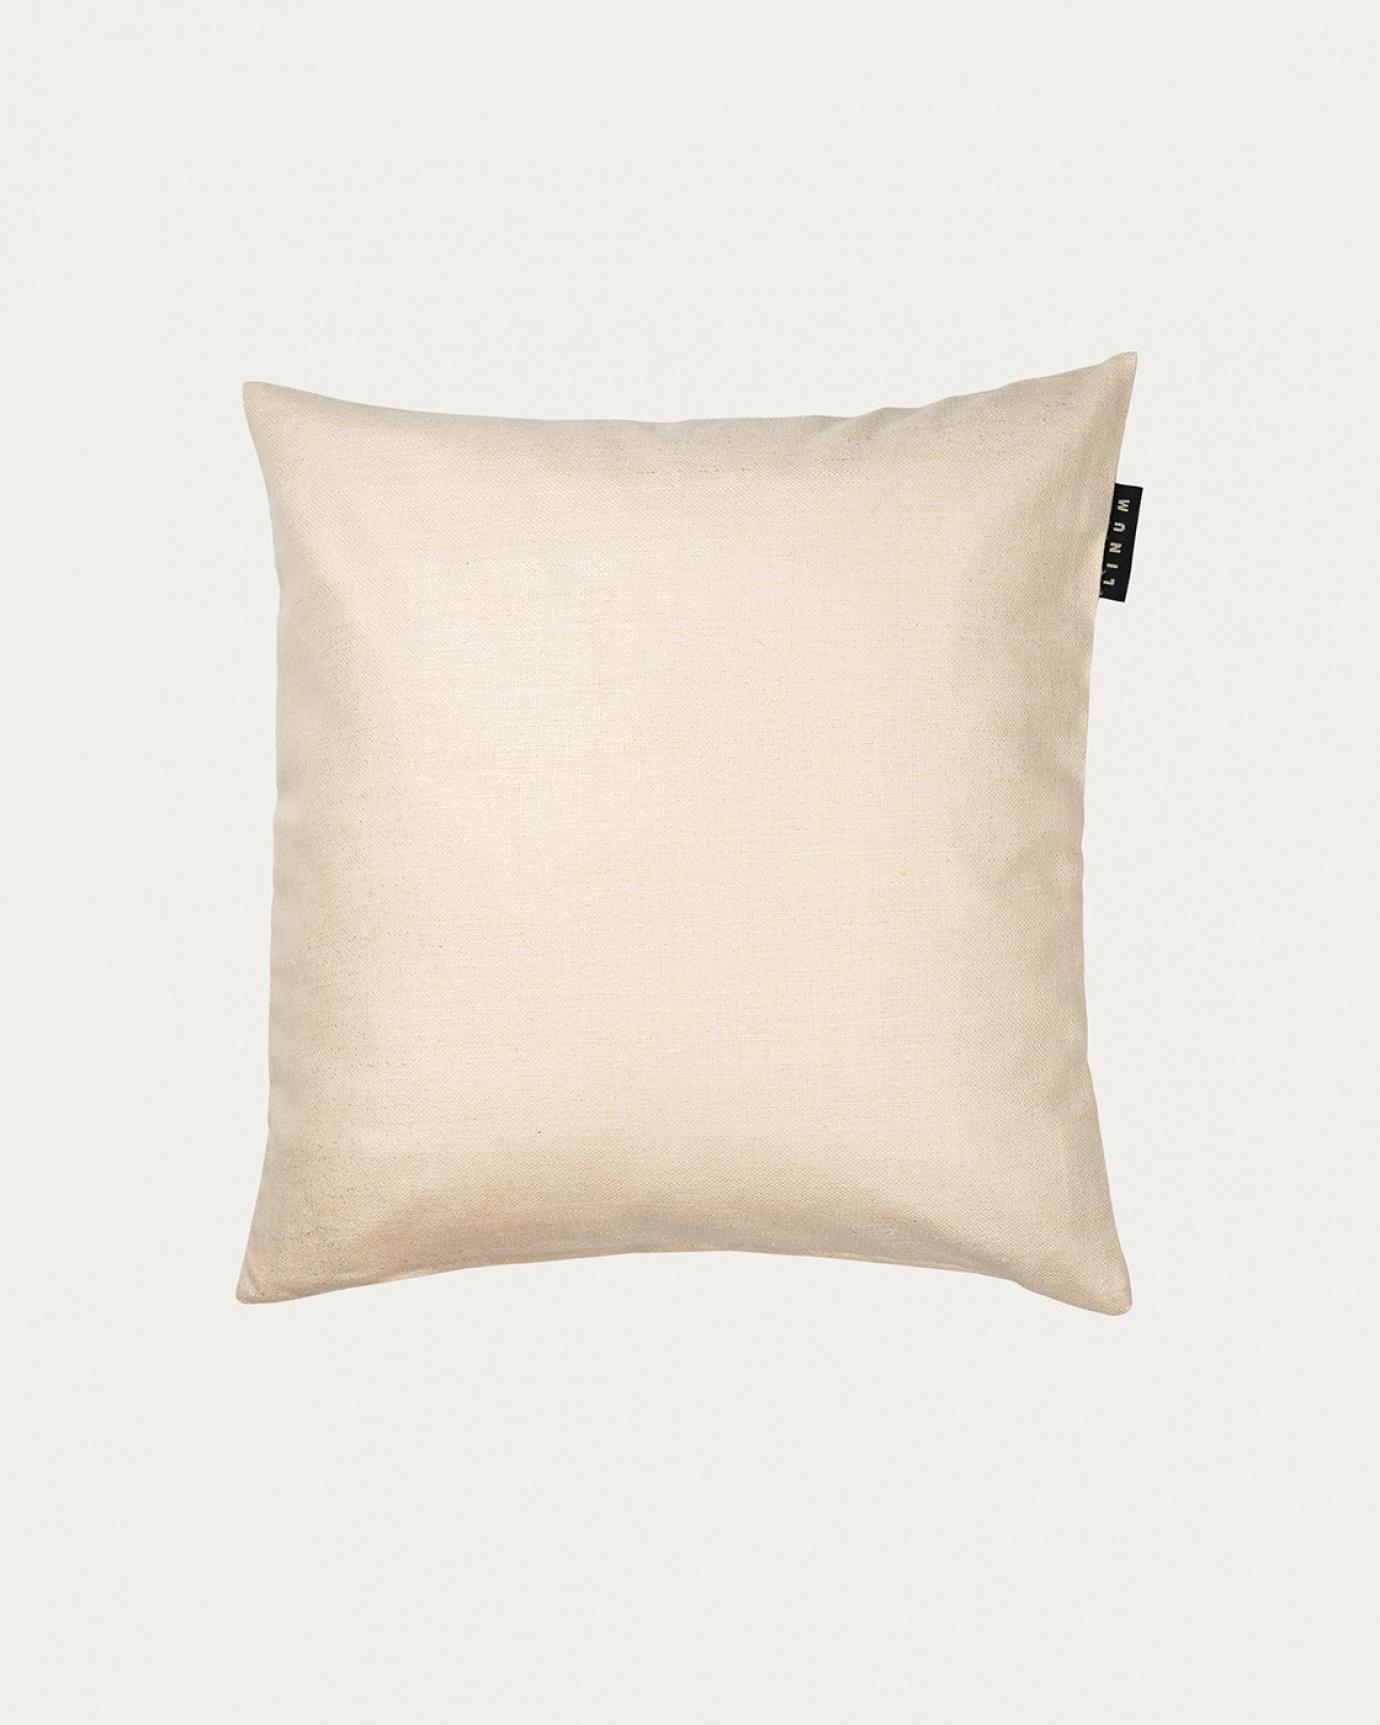 Product image light beige SETA cushion cover made of 100% raw silk that gives a nice lustre from LINUM DESIGN. Size 40x40 cm.